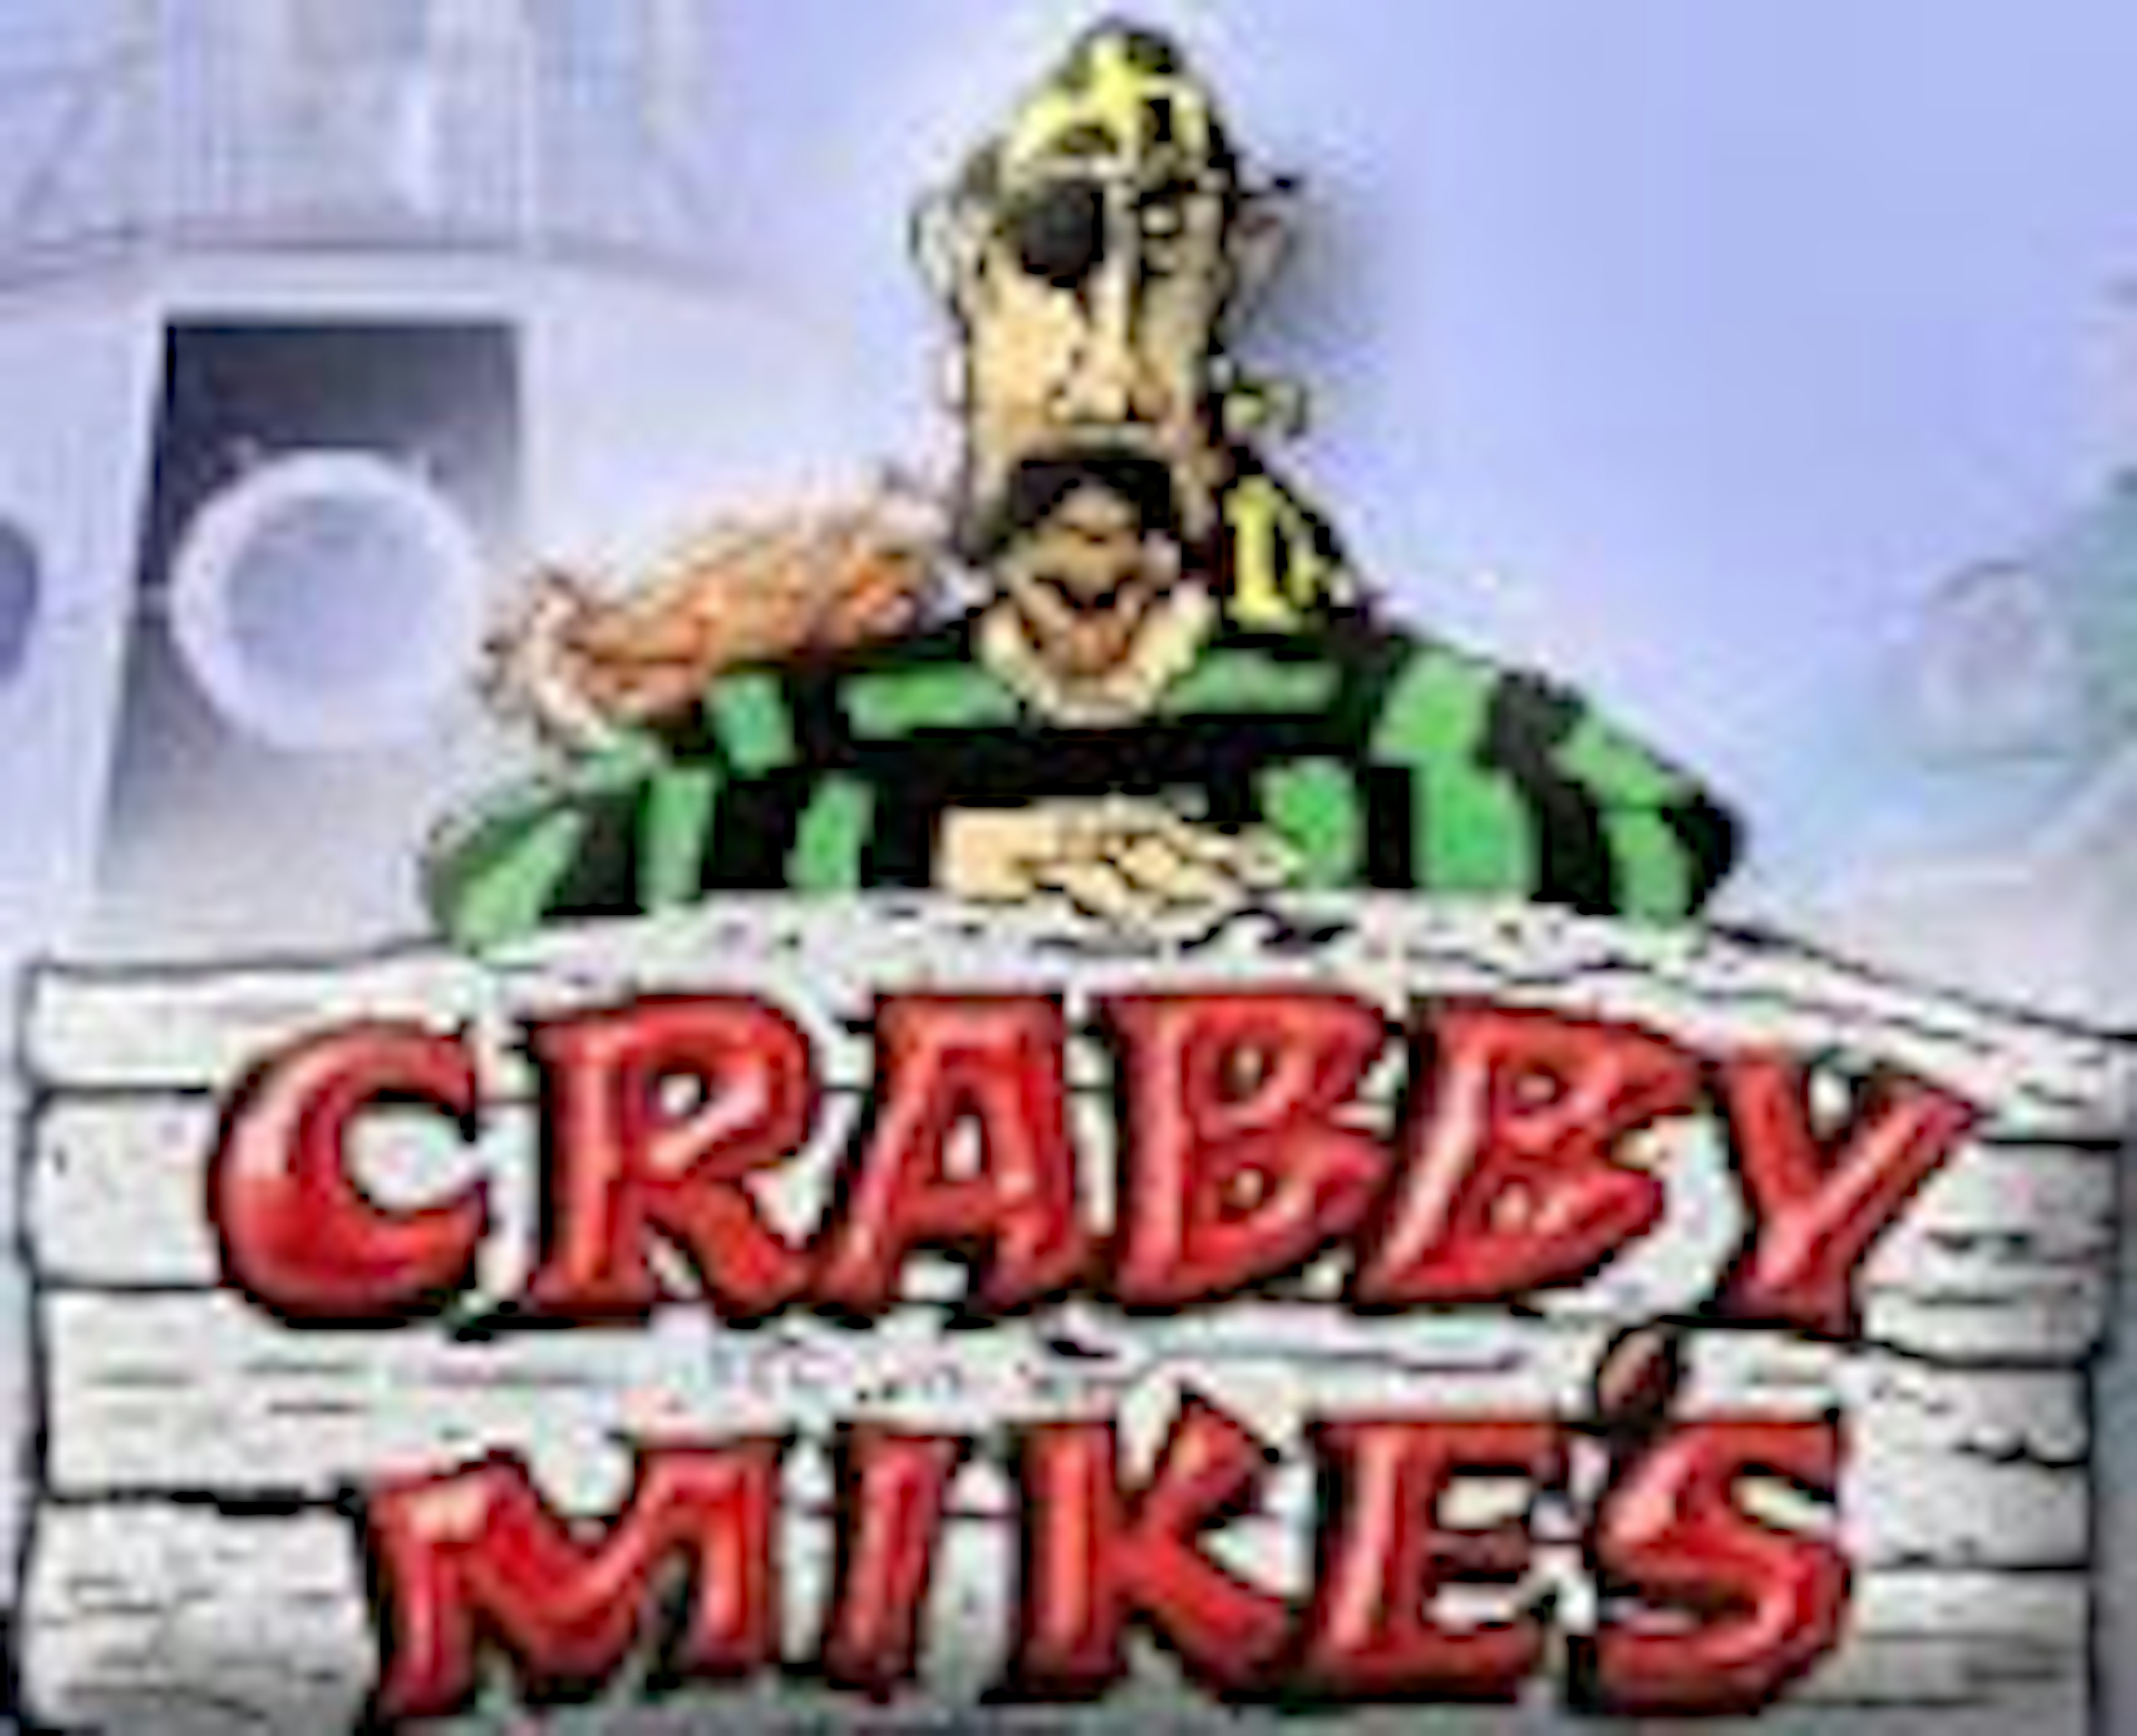 Crabby Mike’s Calabash Seafood